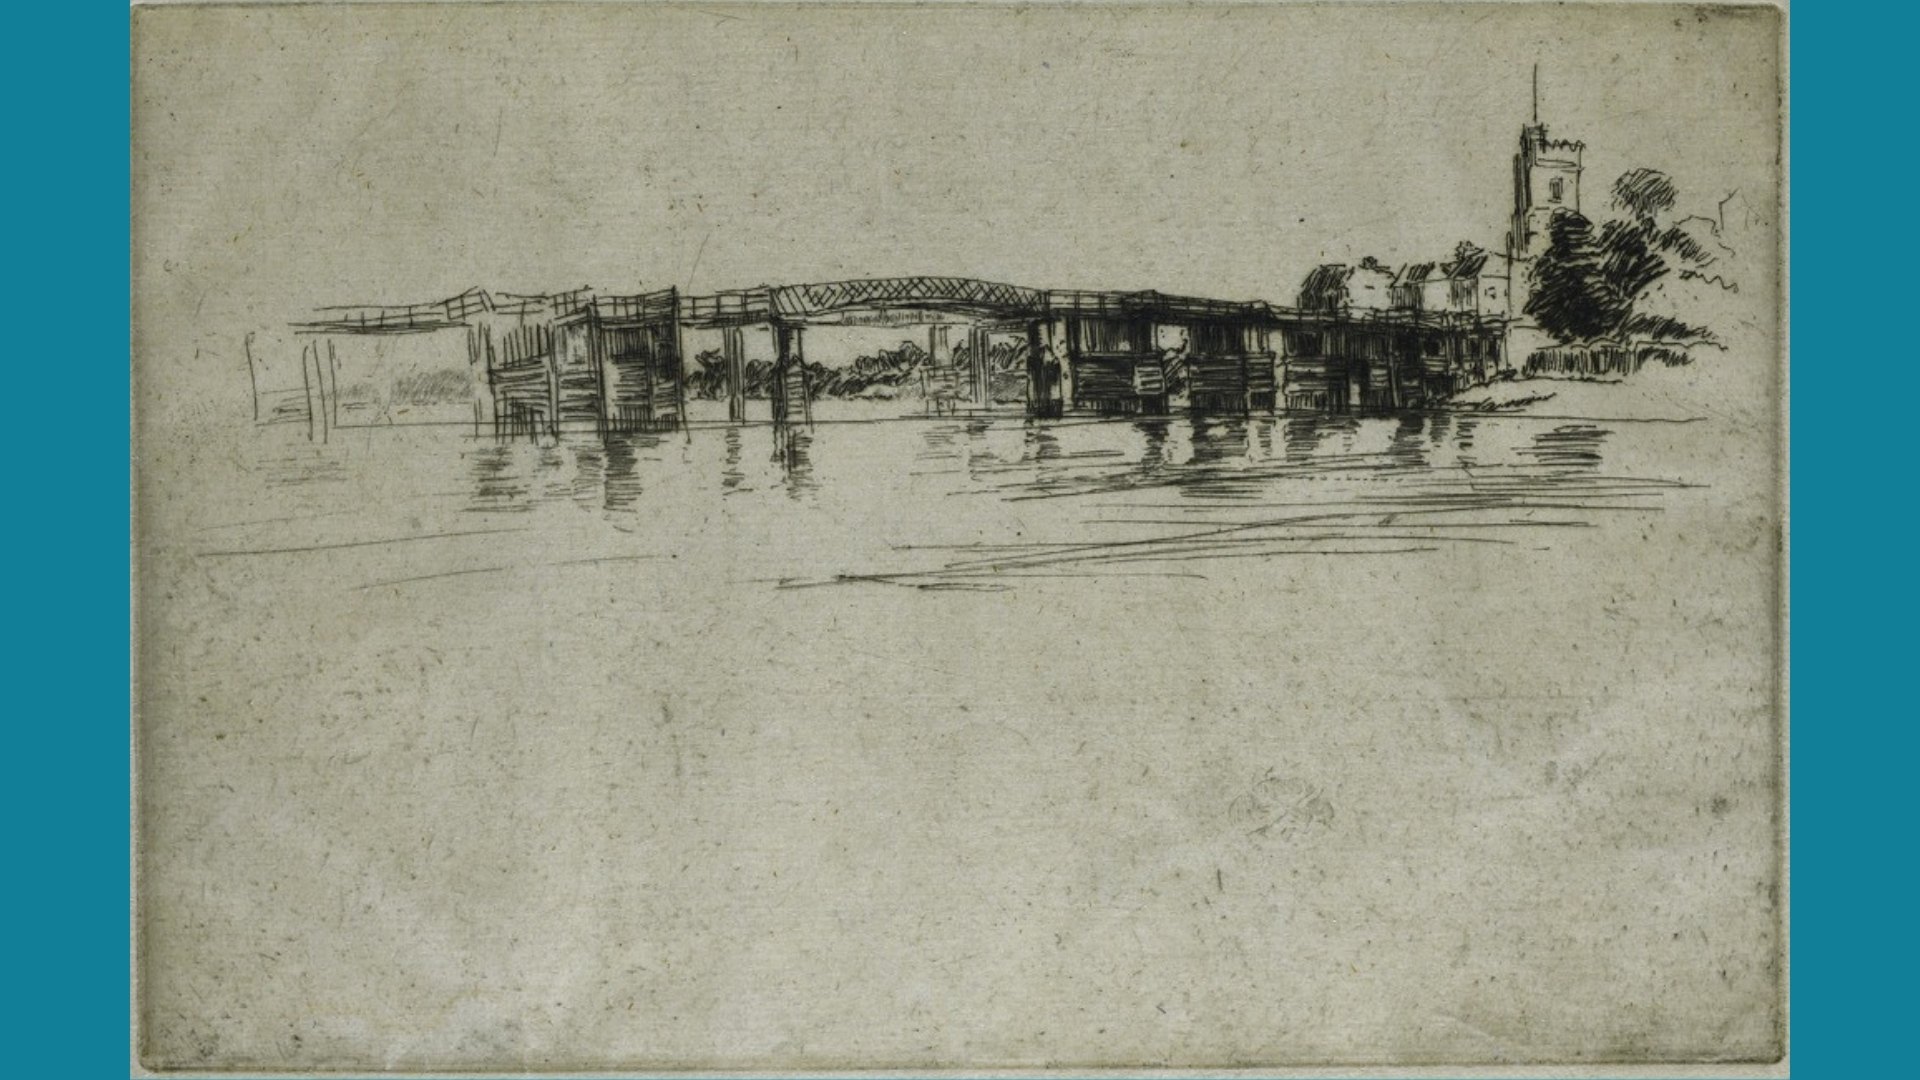 James McNeill Whistler (American, 1834–1903). The Little Putney, No. 1. 1879.